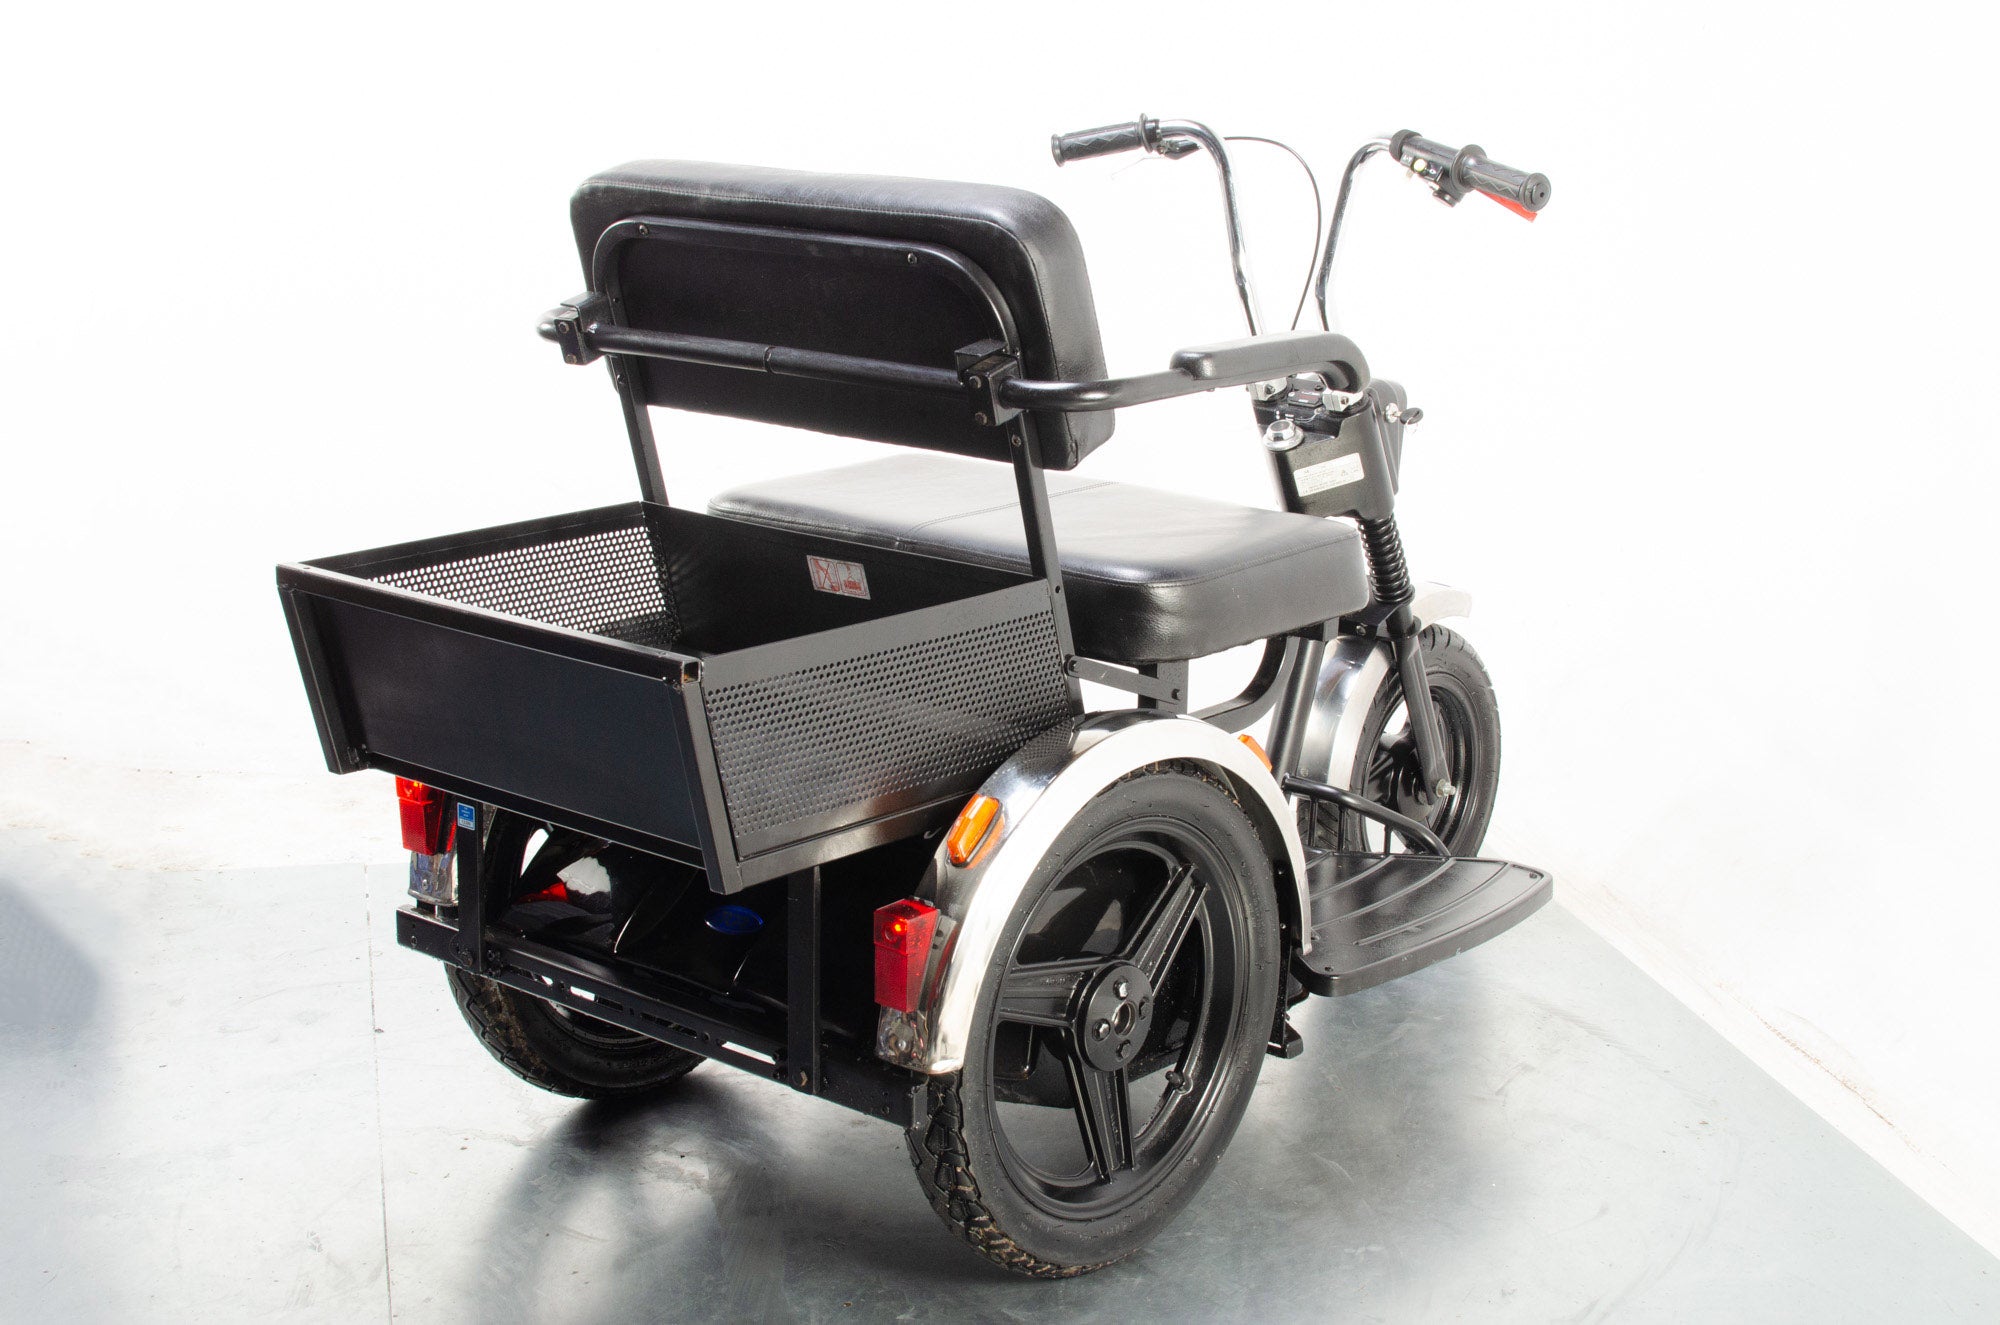 TGA Supersport Twin Seat Tandem Electric Mobility Scooter Trike Road Legal